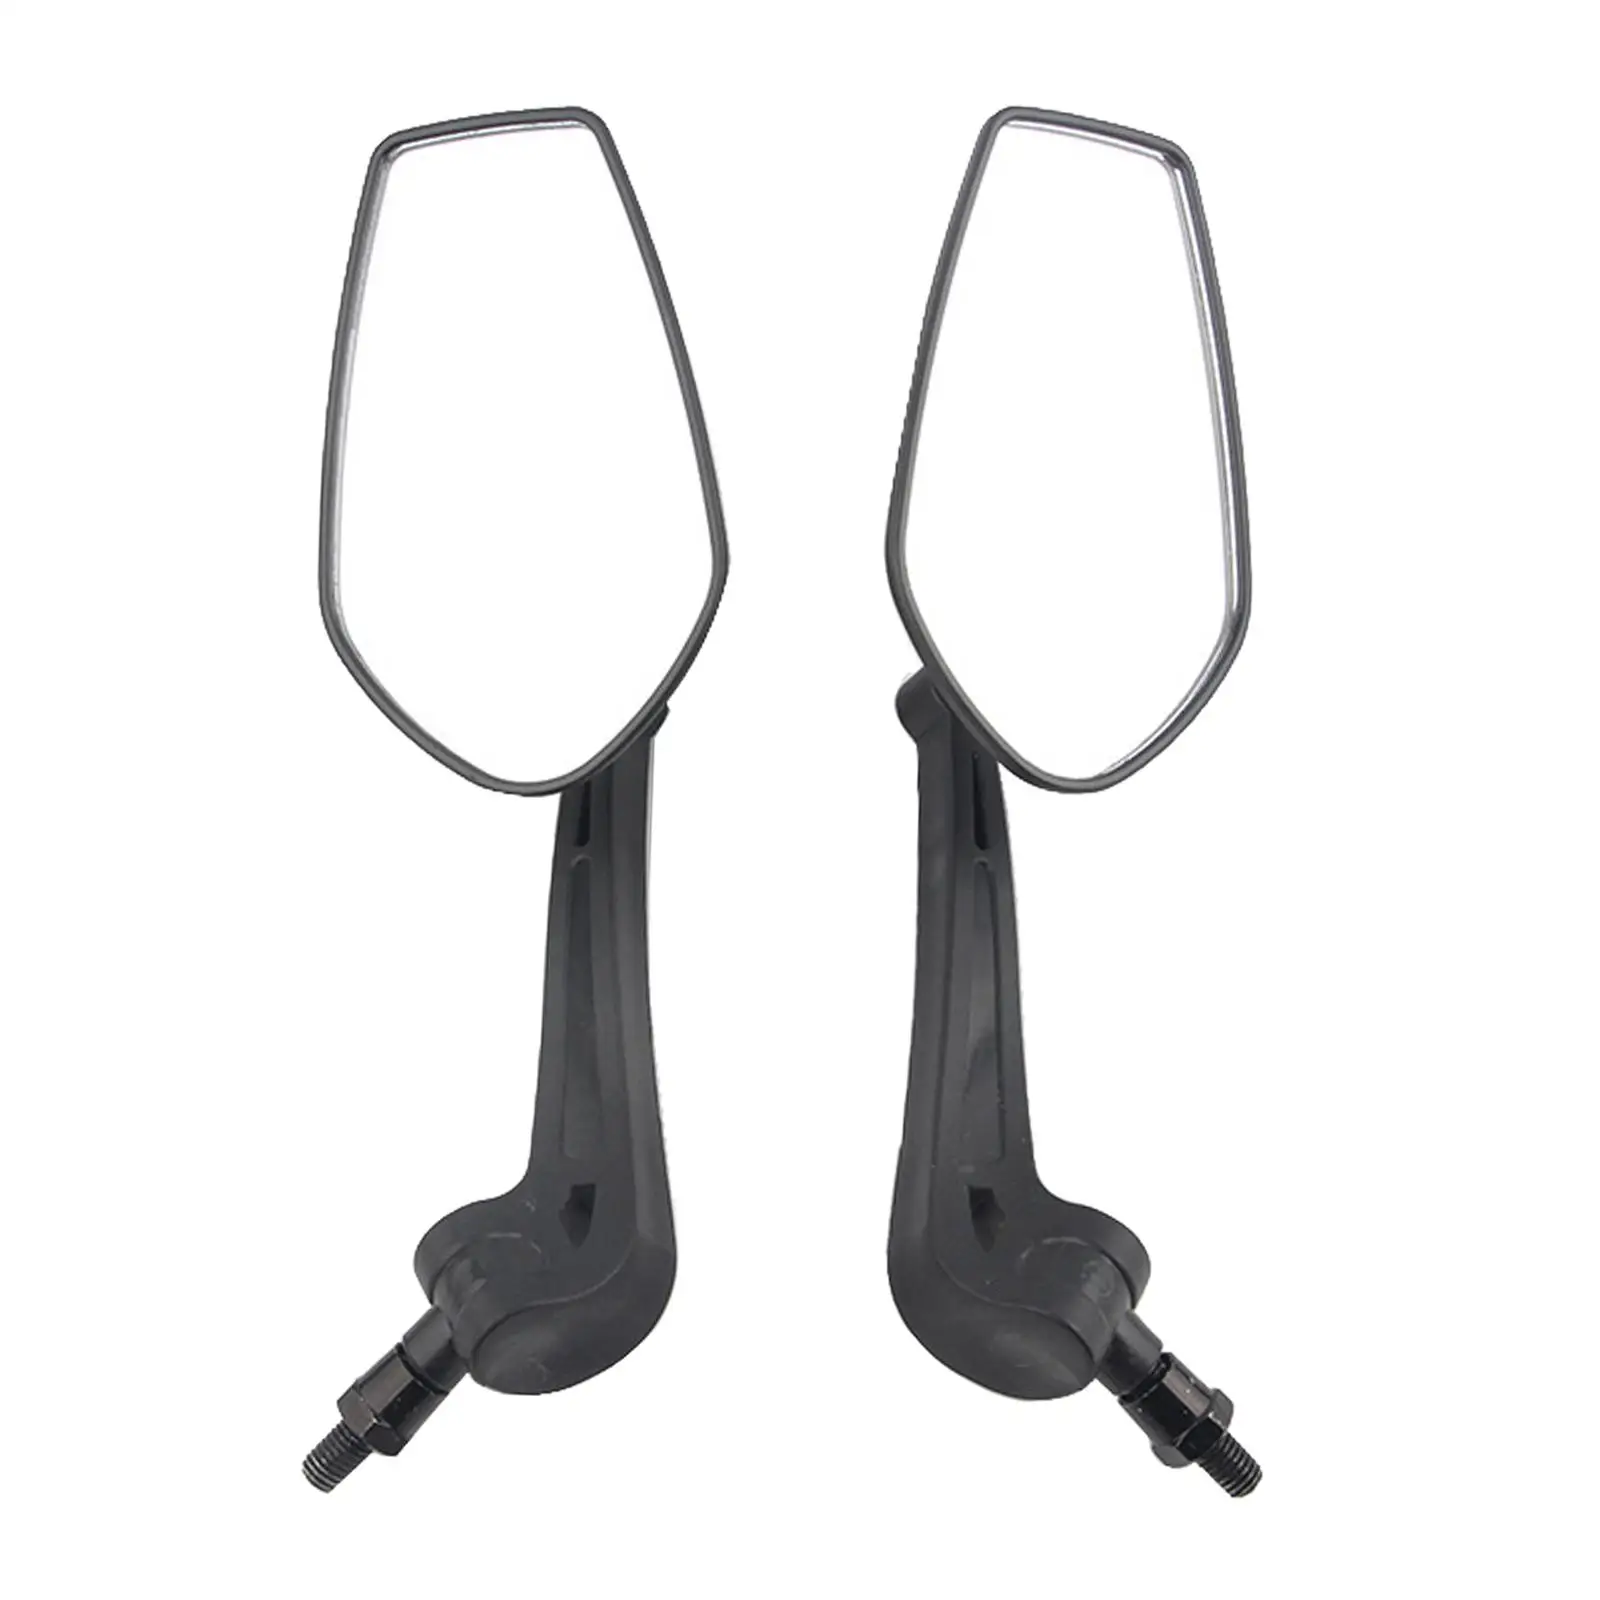 Road Bike Mirror Rotatable Detachable Convex Universal Riding Safety Spare Bike Rear View Mirrors for Bike Modification